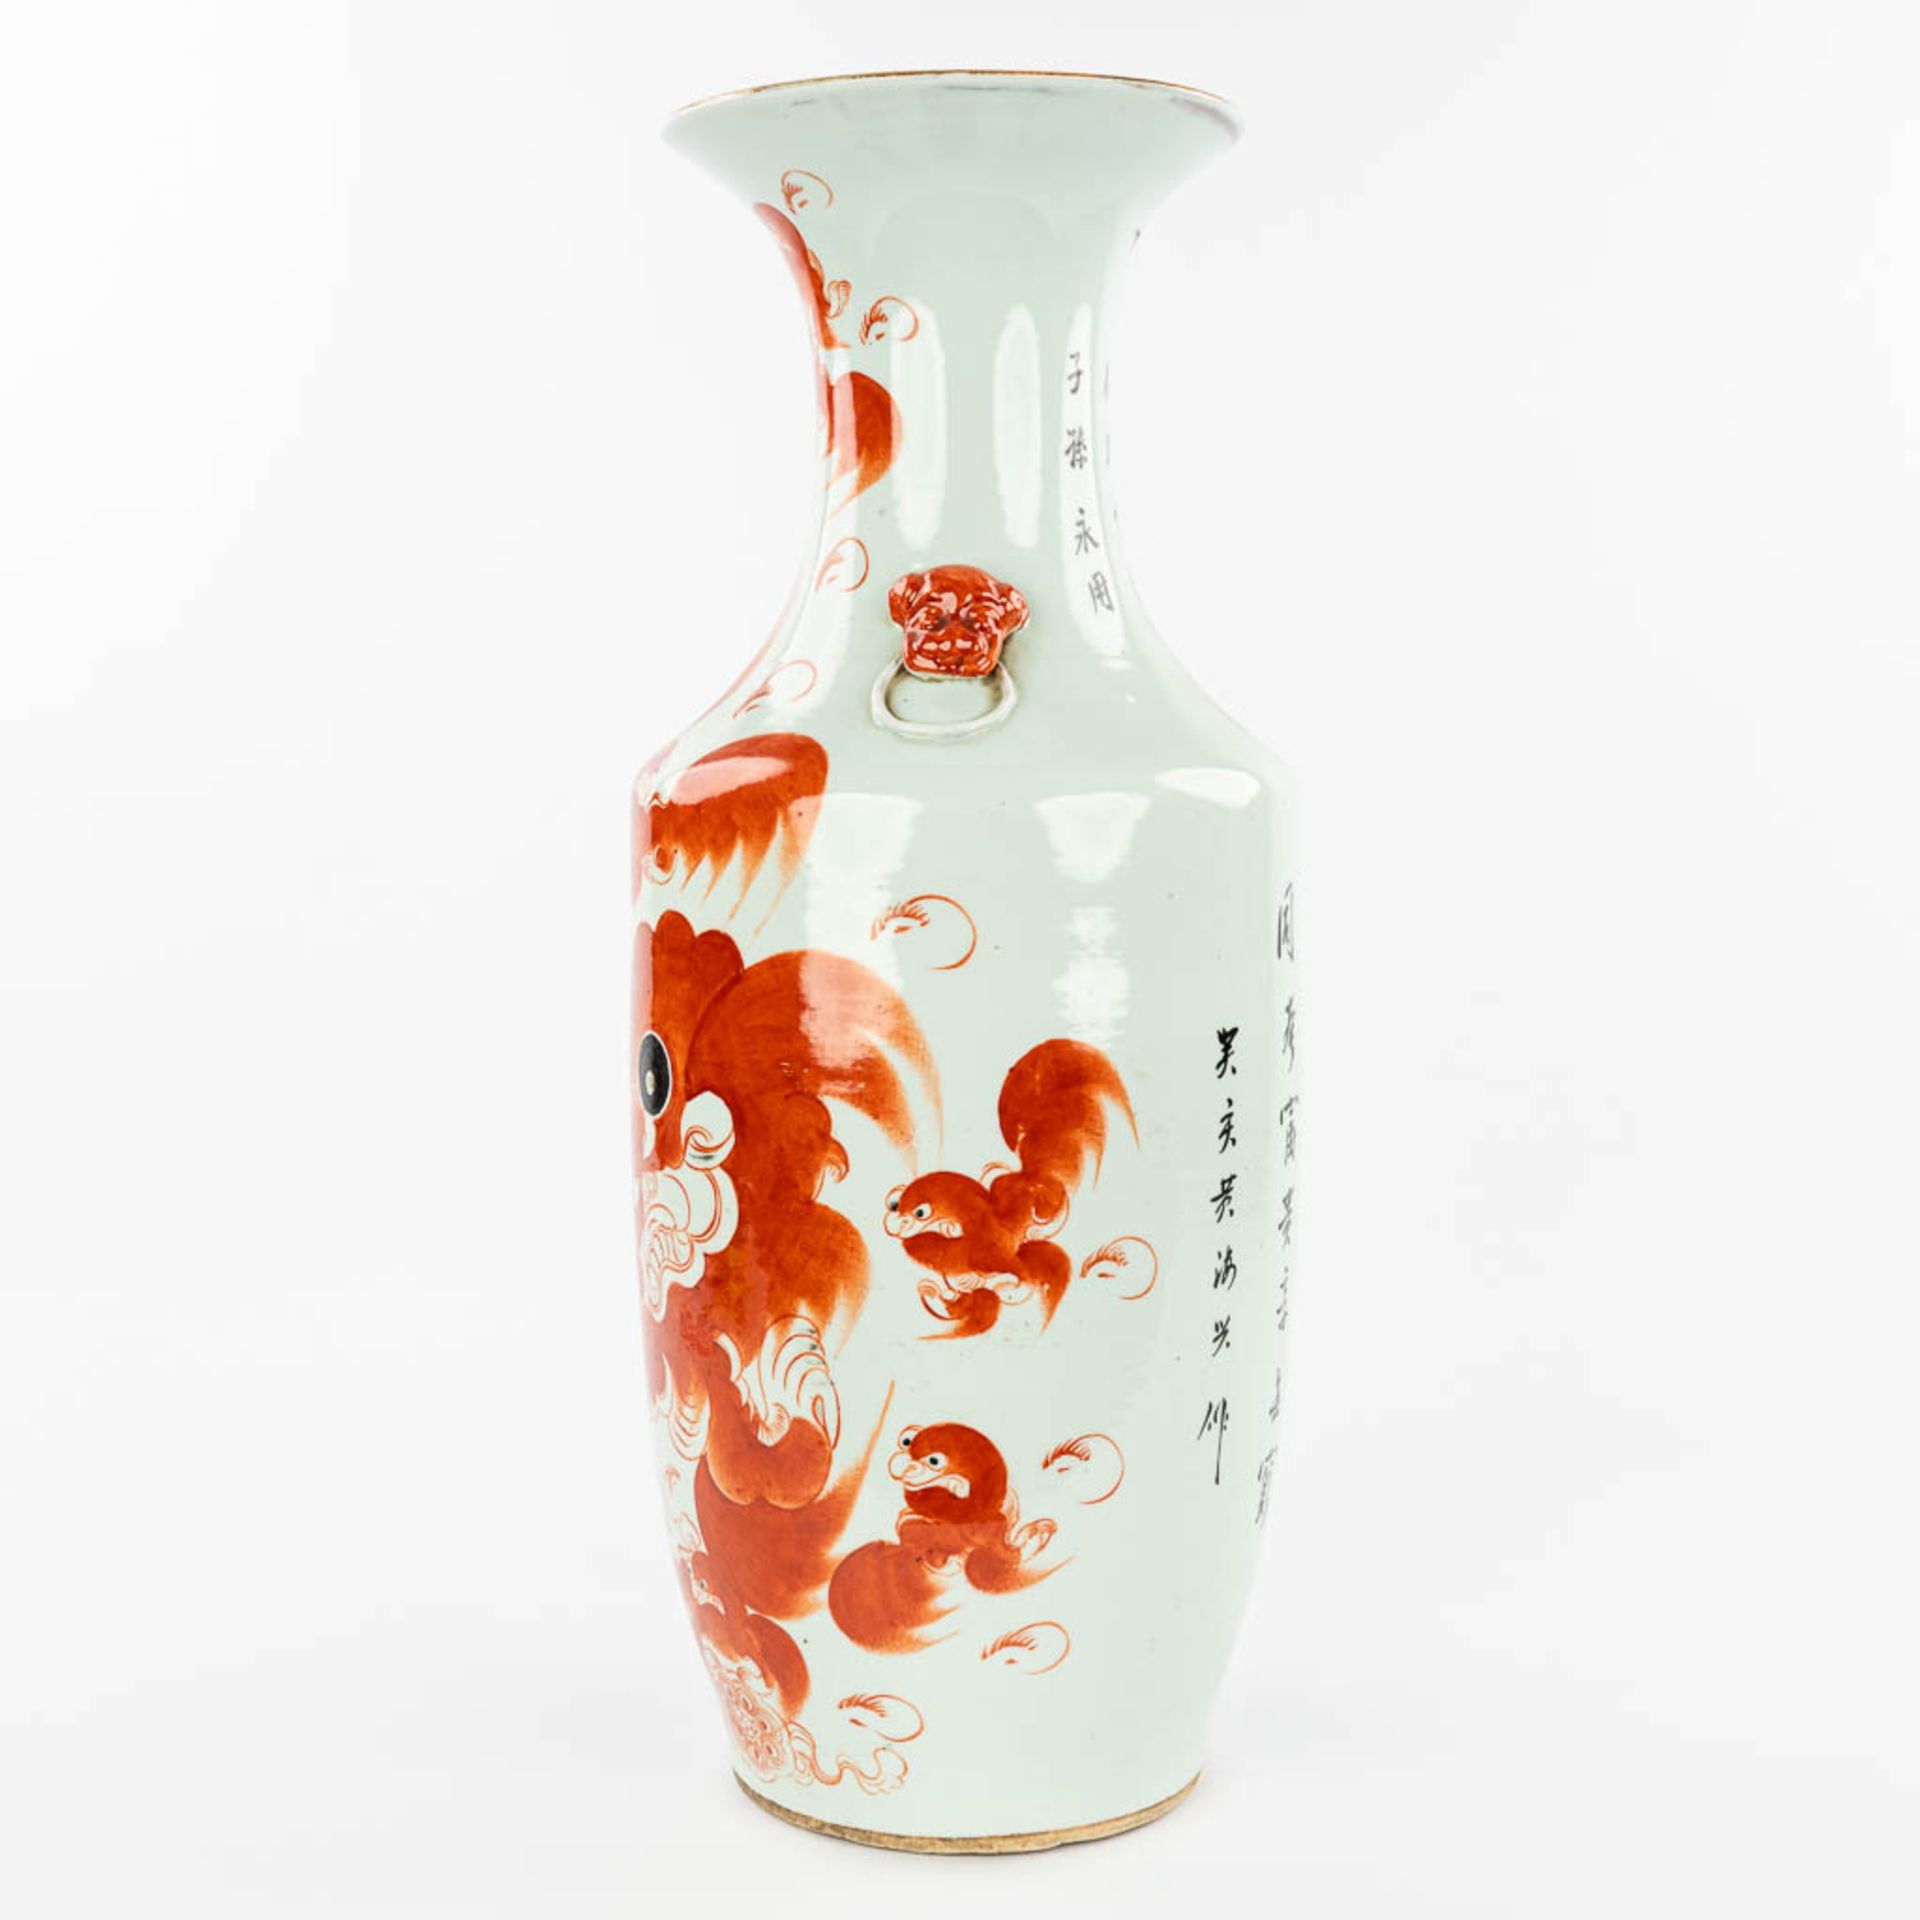 A Chinese vase made of porcelain and decorated with a red foo dog. (H:59cm) - Image 7 of 14